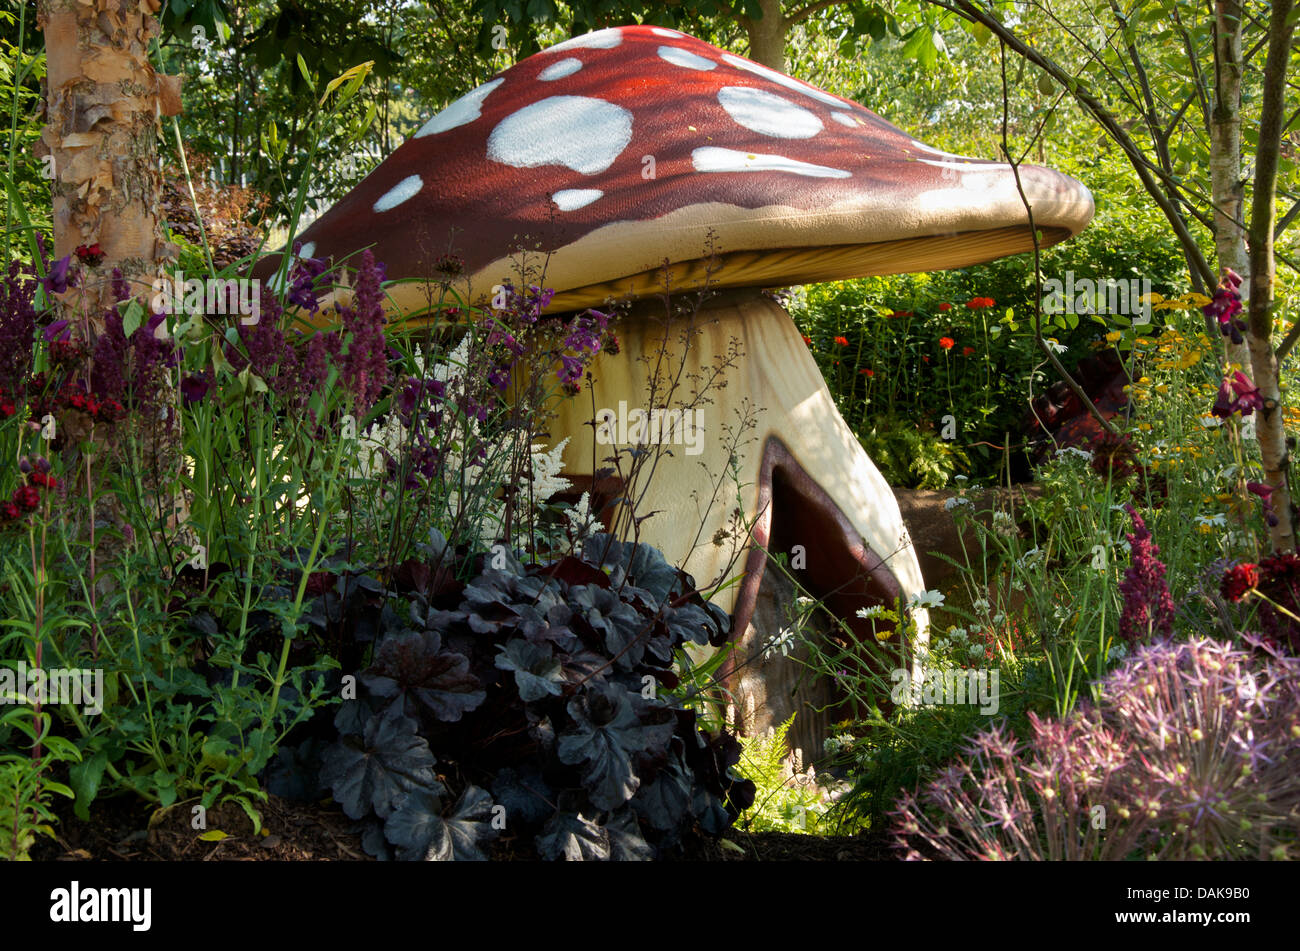 Giant toadstool The One Show Garden at RHS Hampton Court Palace Flower Show 2013, London, UK Stock Photo